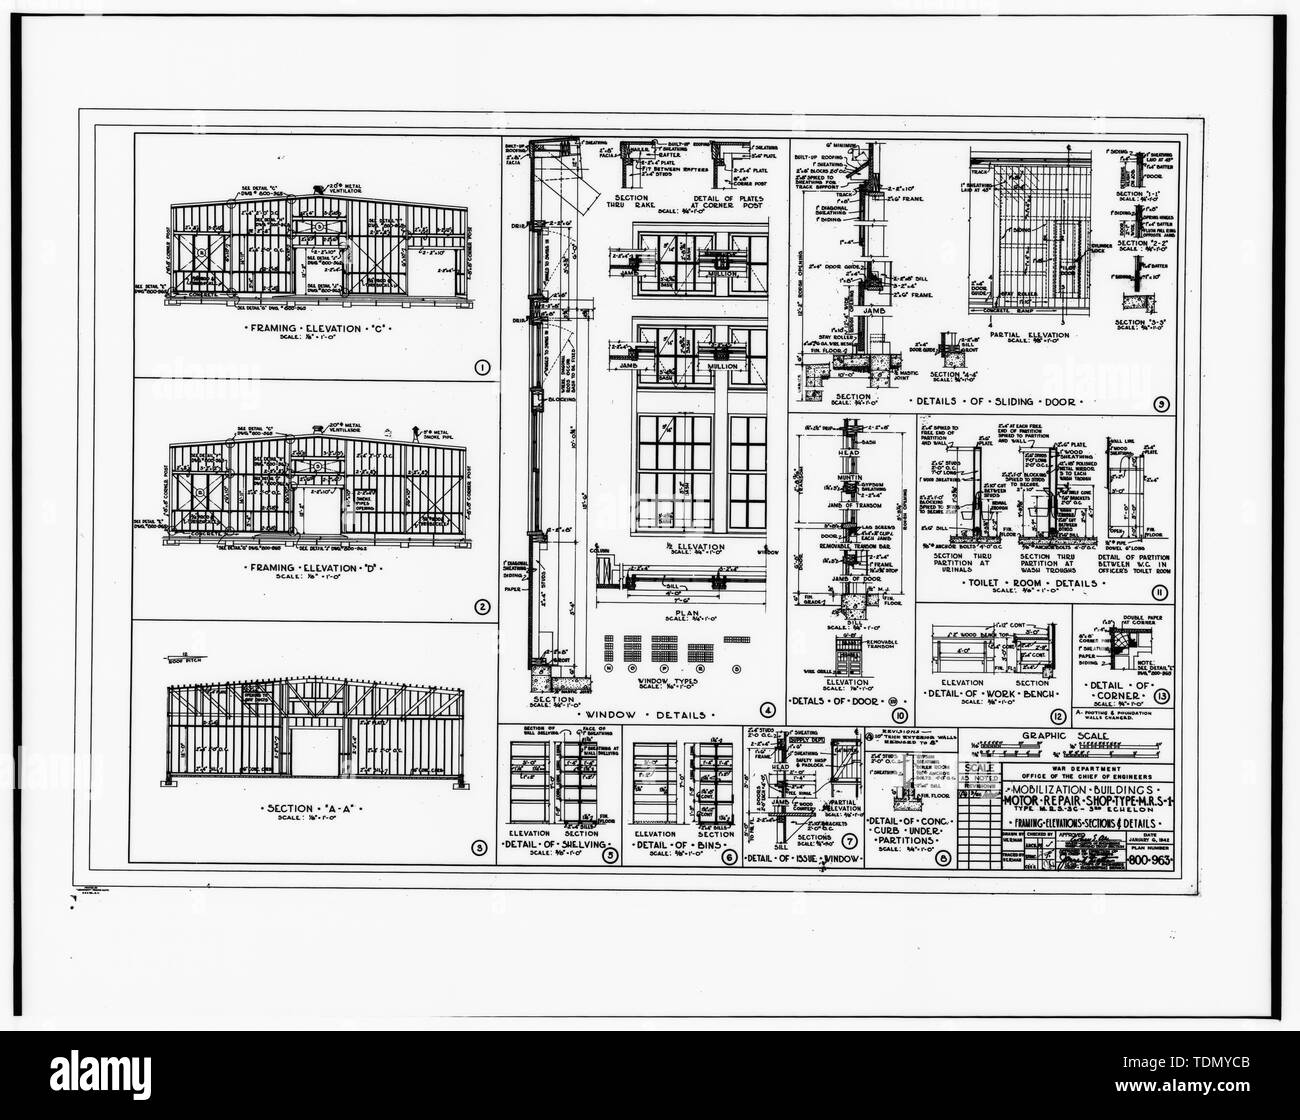 PLAN 800-963; MOTOR REPAIR SHOP, TYPE M.R.S.-1, FRAMING ELEVATIONS, SECTIONS and DETAILS - Fort McCoy, Building No. 1463, Sparta, Monroe County, WI Stock Photo